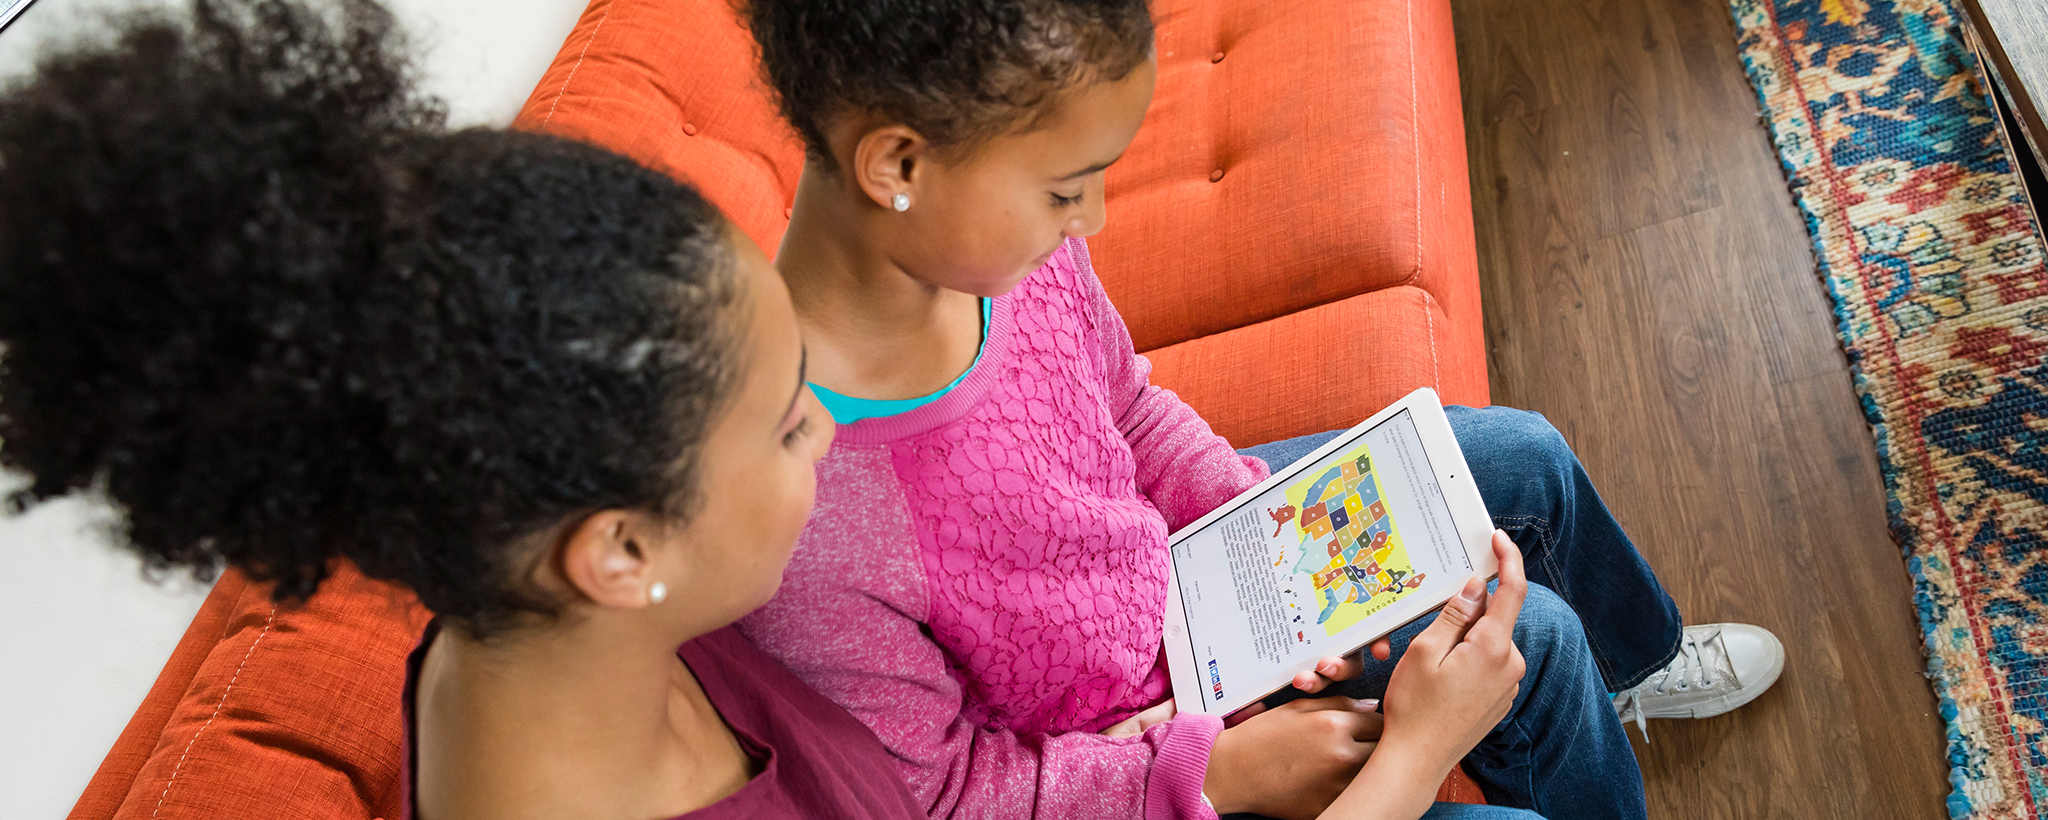 An older girl and a child are using a tablet devices to examine a map of the United States